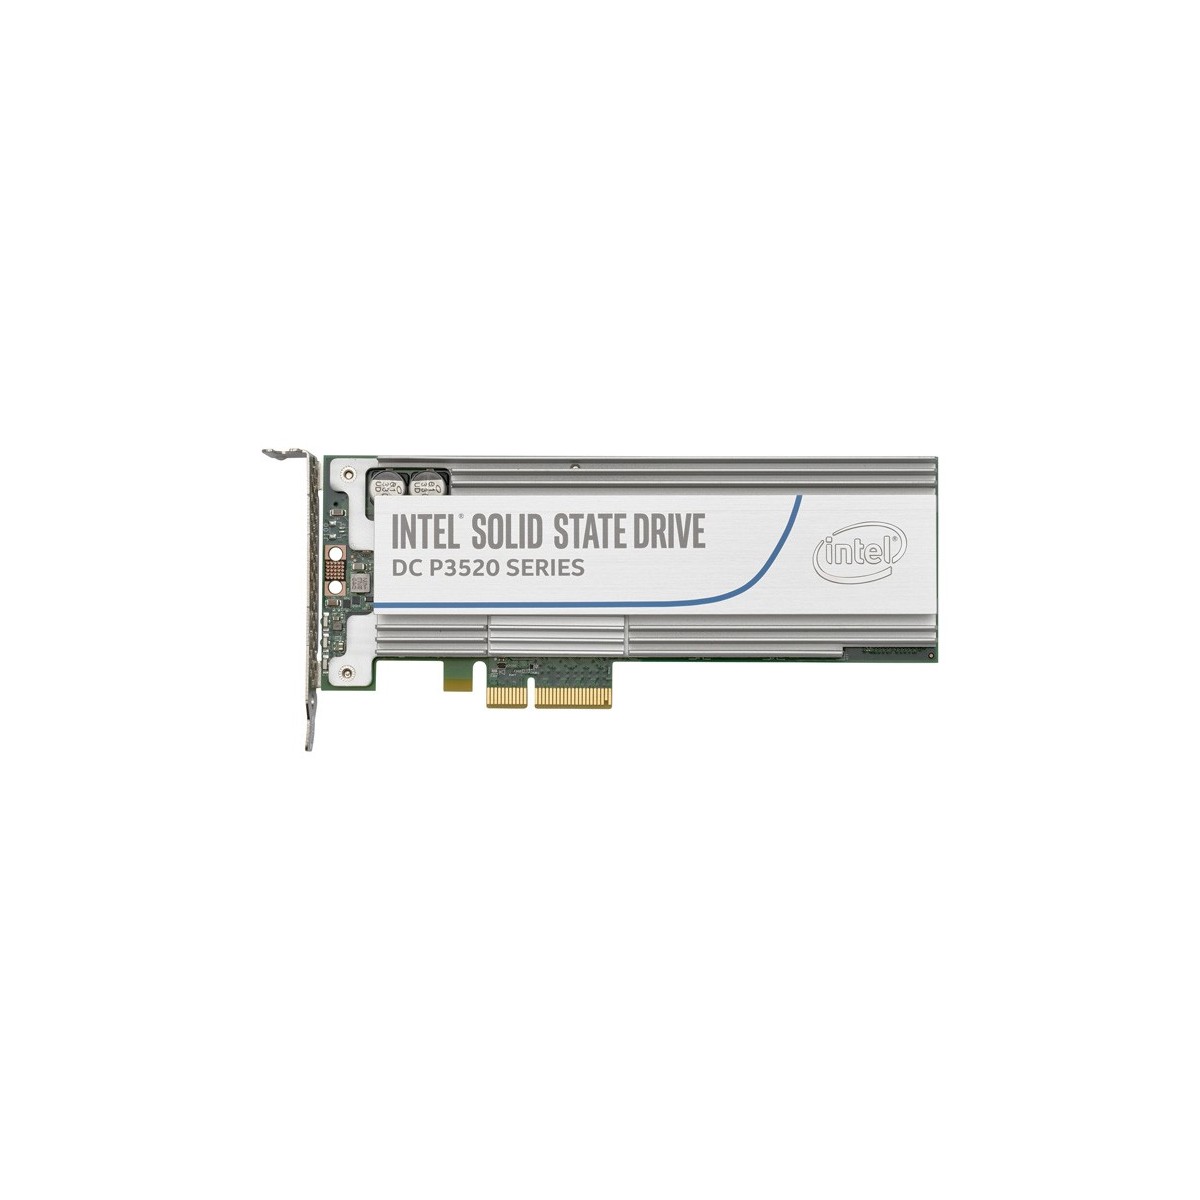 Intel Solid-State Drive DC P3520 Series 2.5 NVMe 1,200 GB - Solid State Disk - Internal